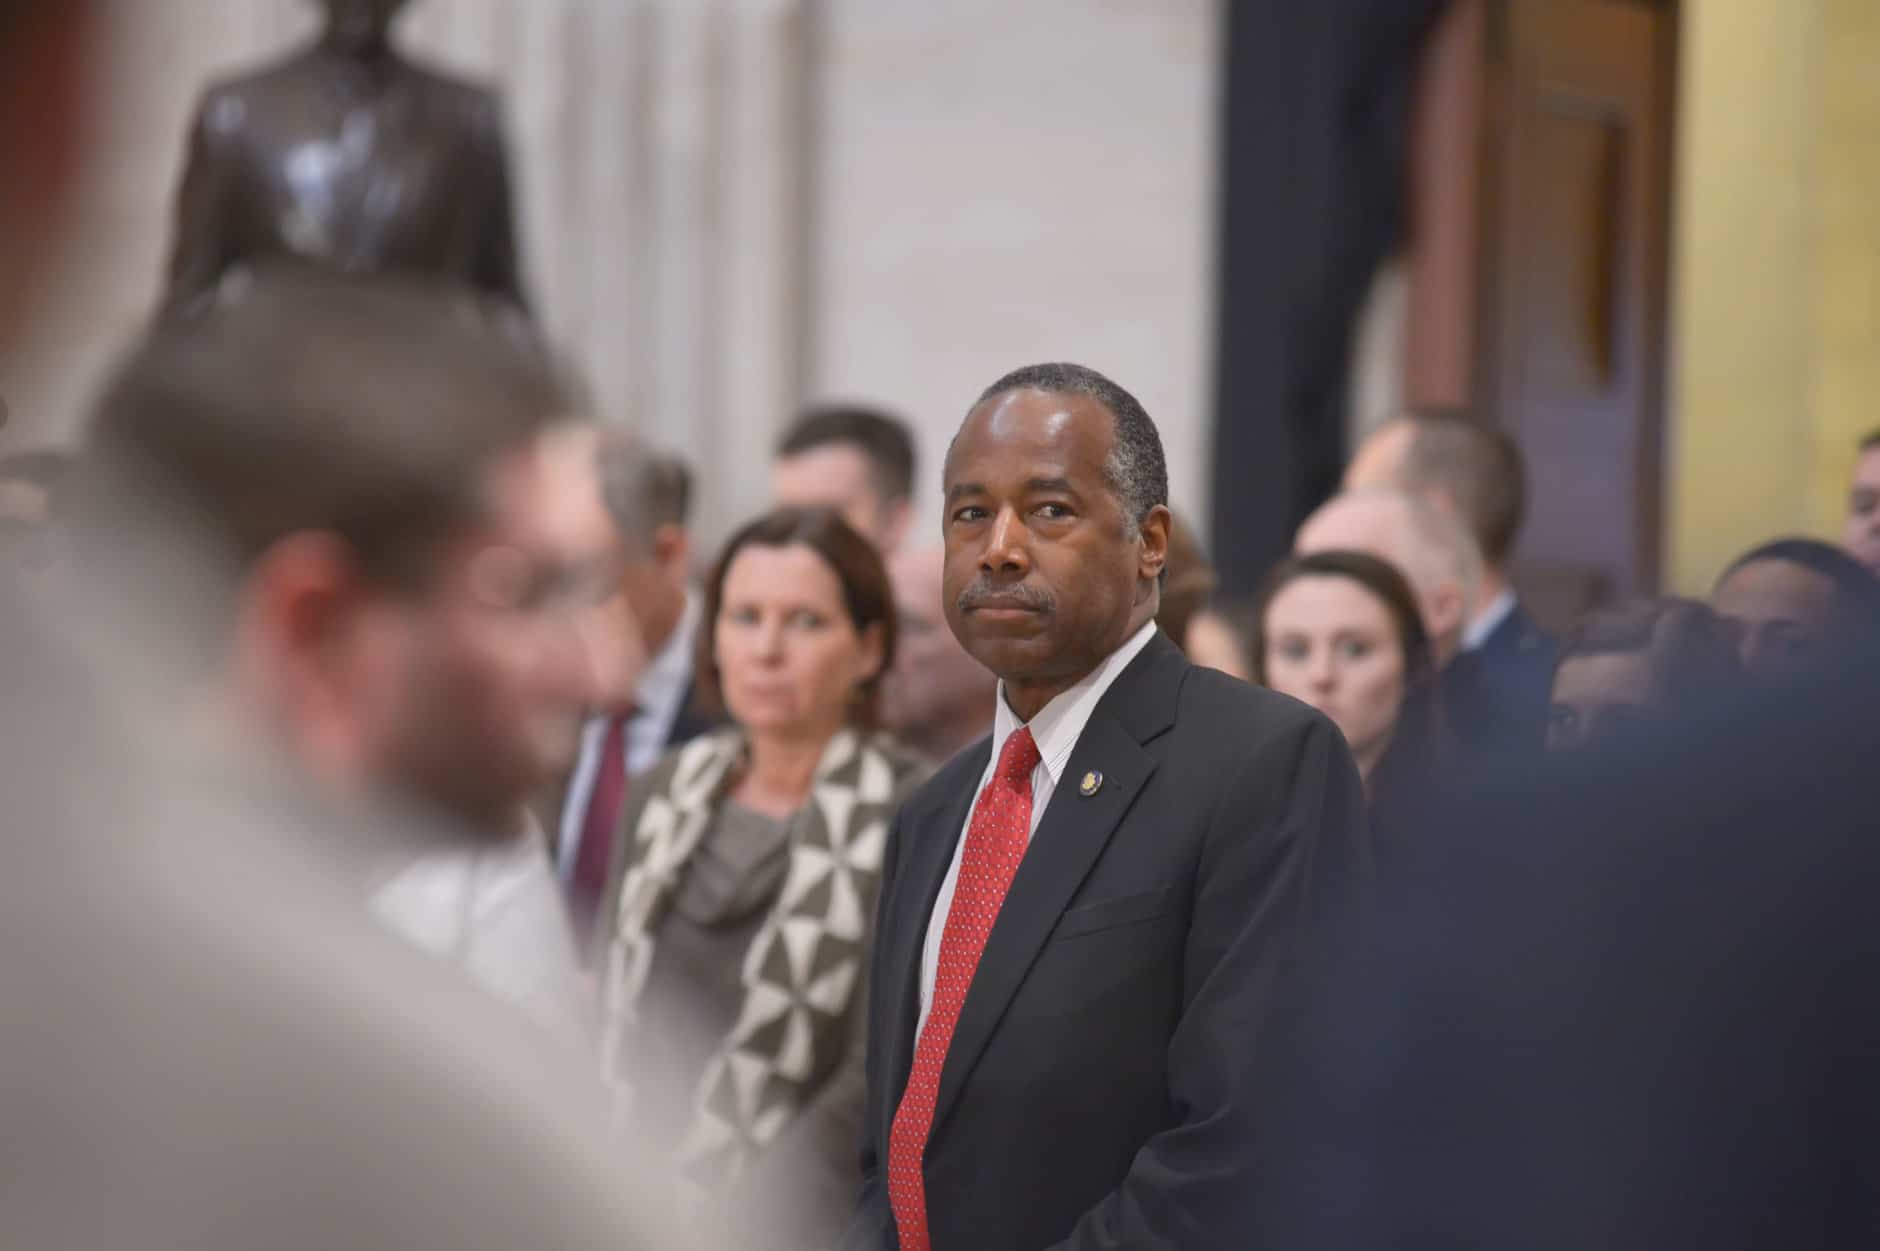 Dr. Ben Carson, U.S. Secretary of Housing and Urban Development, attends the lying-in-state for President George H.W. Bush at the U.S. Capitol on December 4, 2018. (Courtesy Shannon Finney/<a href="https://www.shannonfinneyphotography.com/index" target="_blank" rel="noopener noreferrer">shannonfinneyphotography.com</a>)